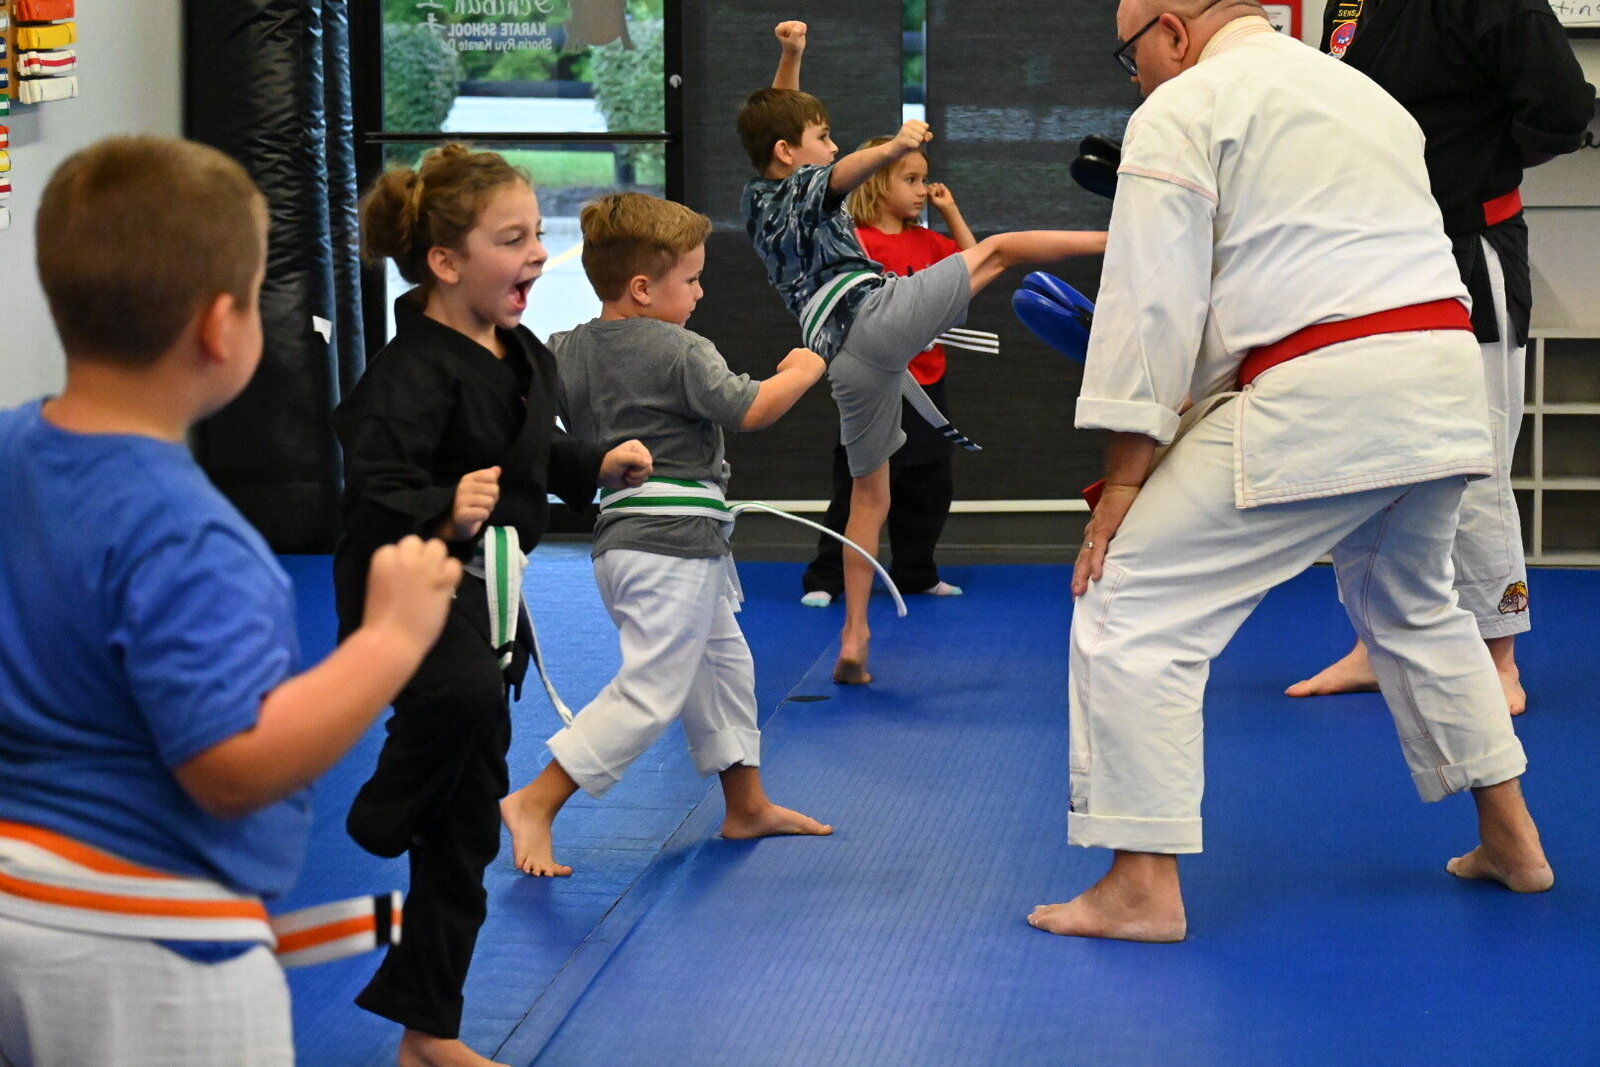 Kids practicing karate with instructors